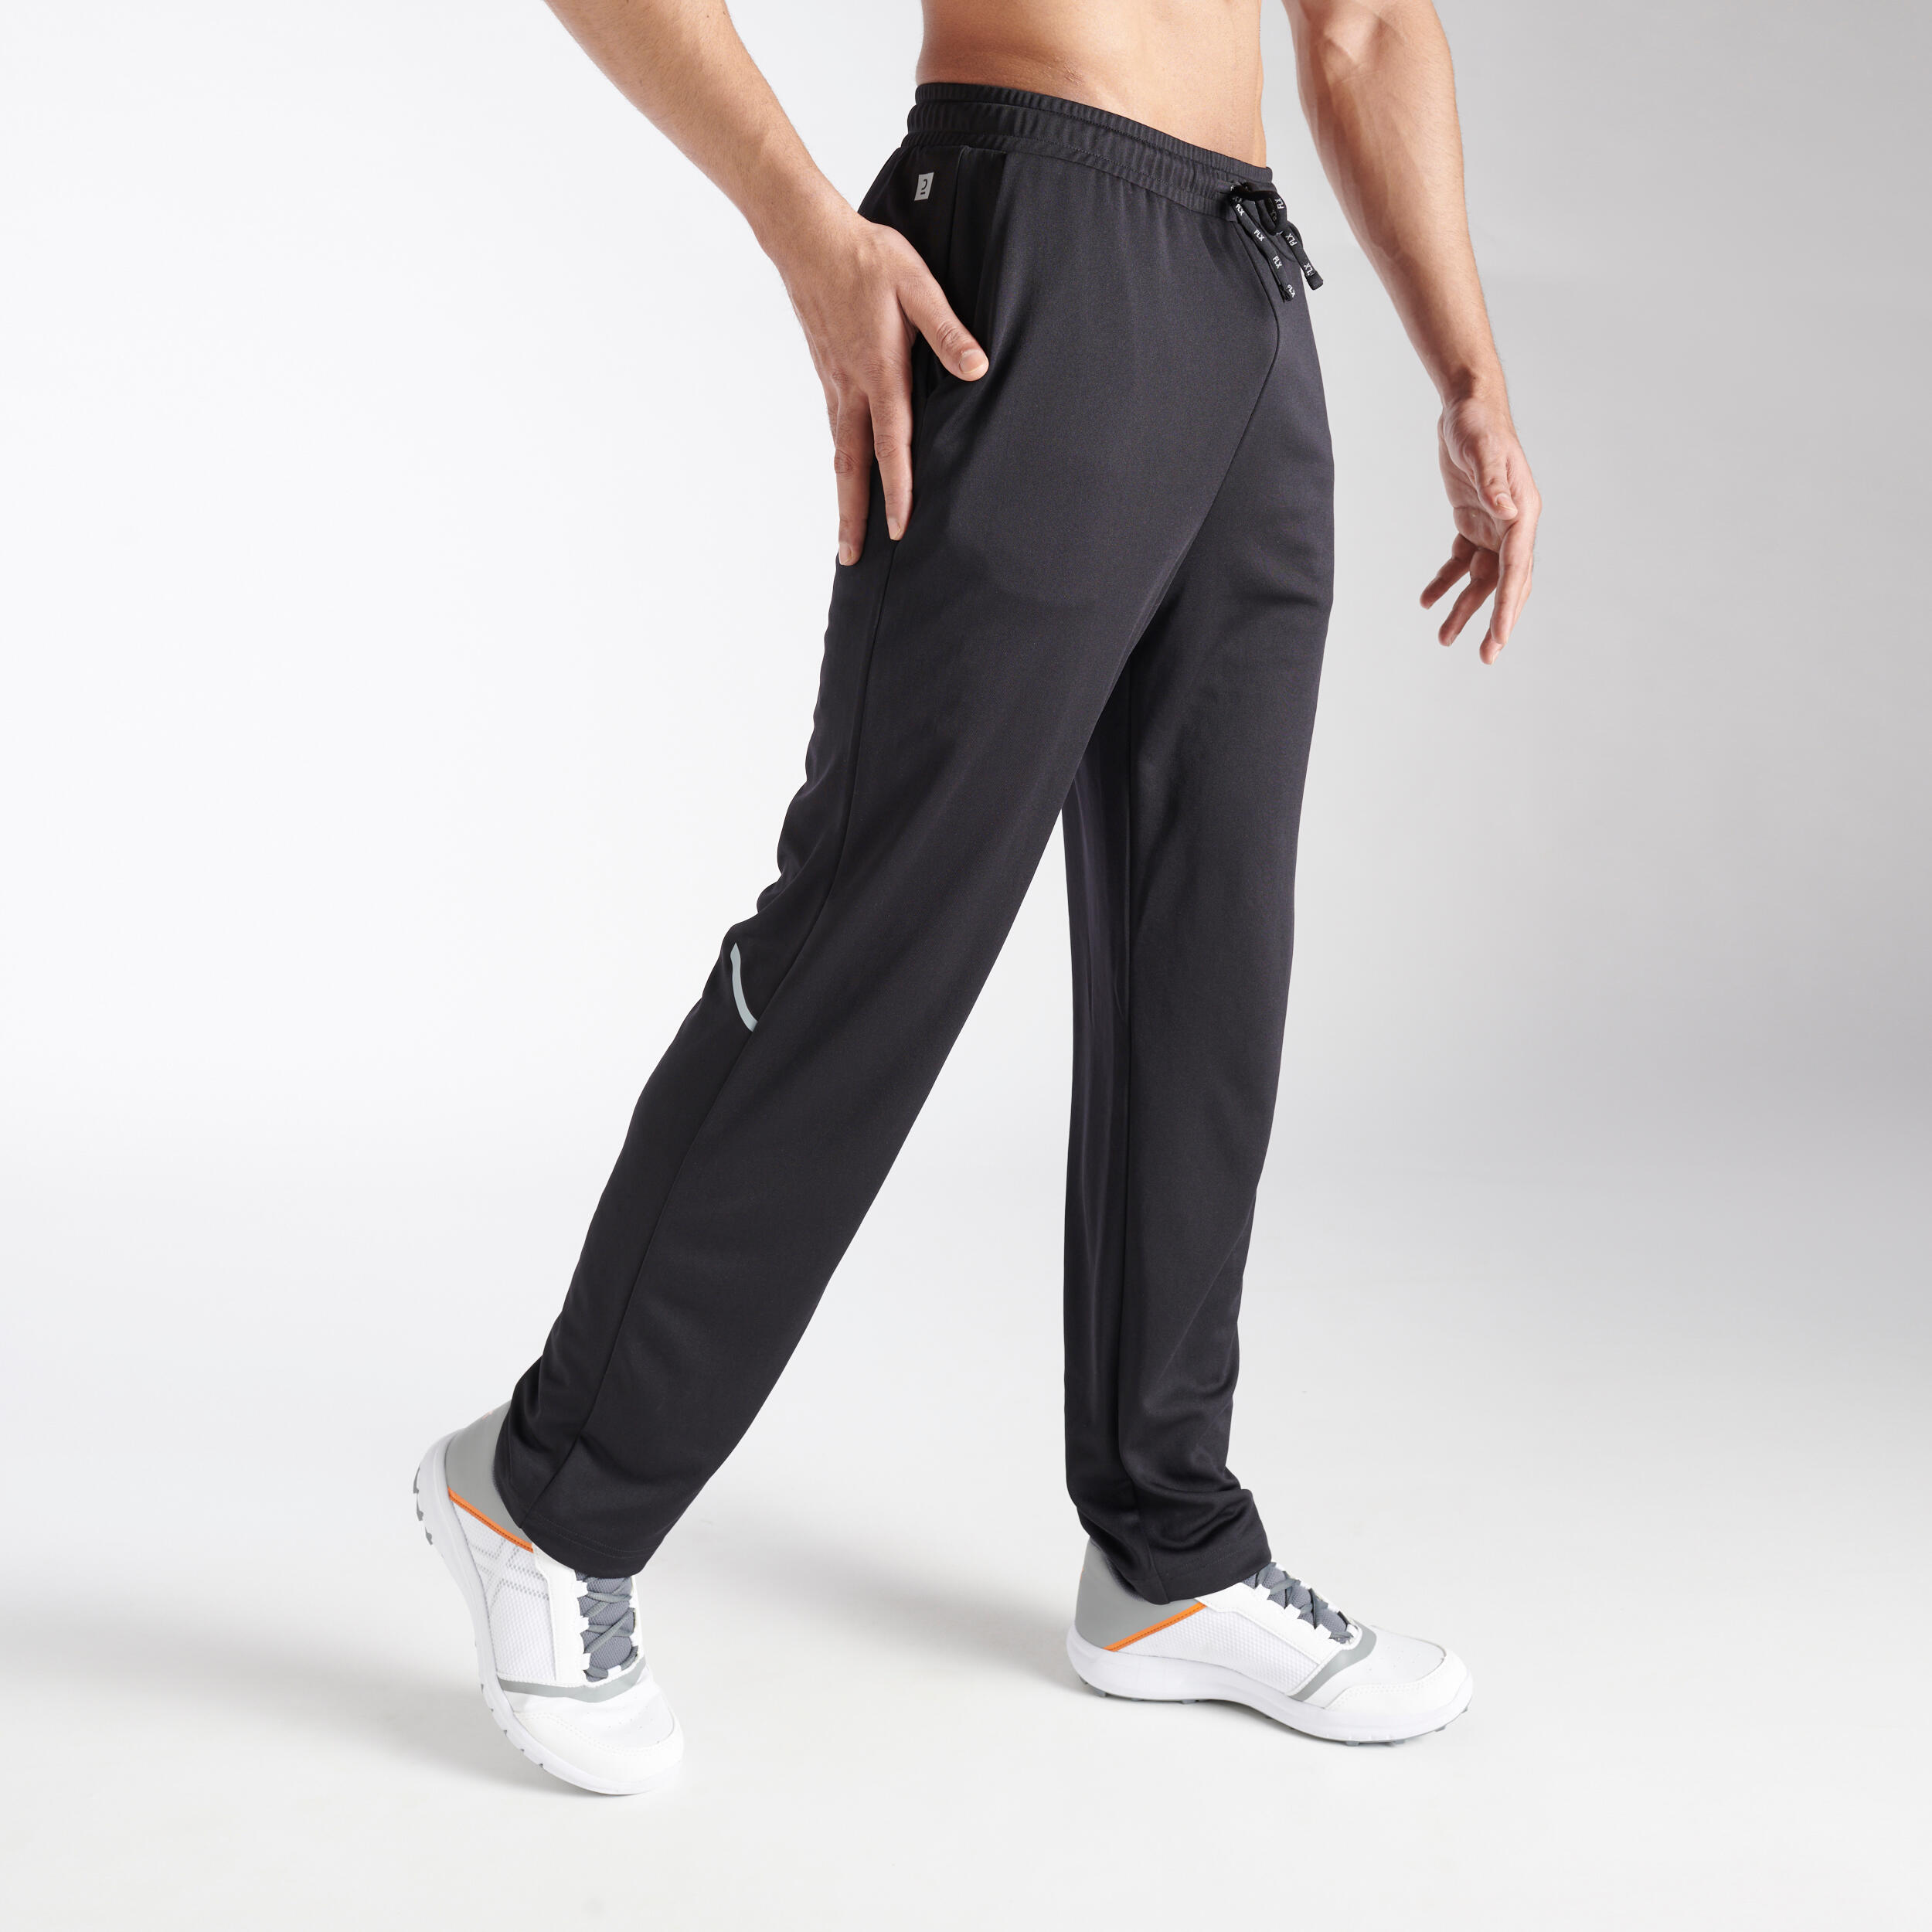 Flx Track Pants Slim Fit TPR 500 Adults Cricket  All Sports  Black  S  Amazonin Clothing  Accessories